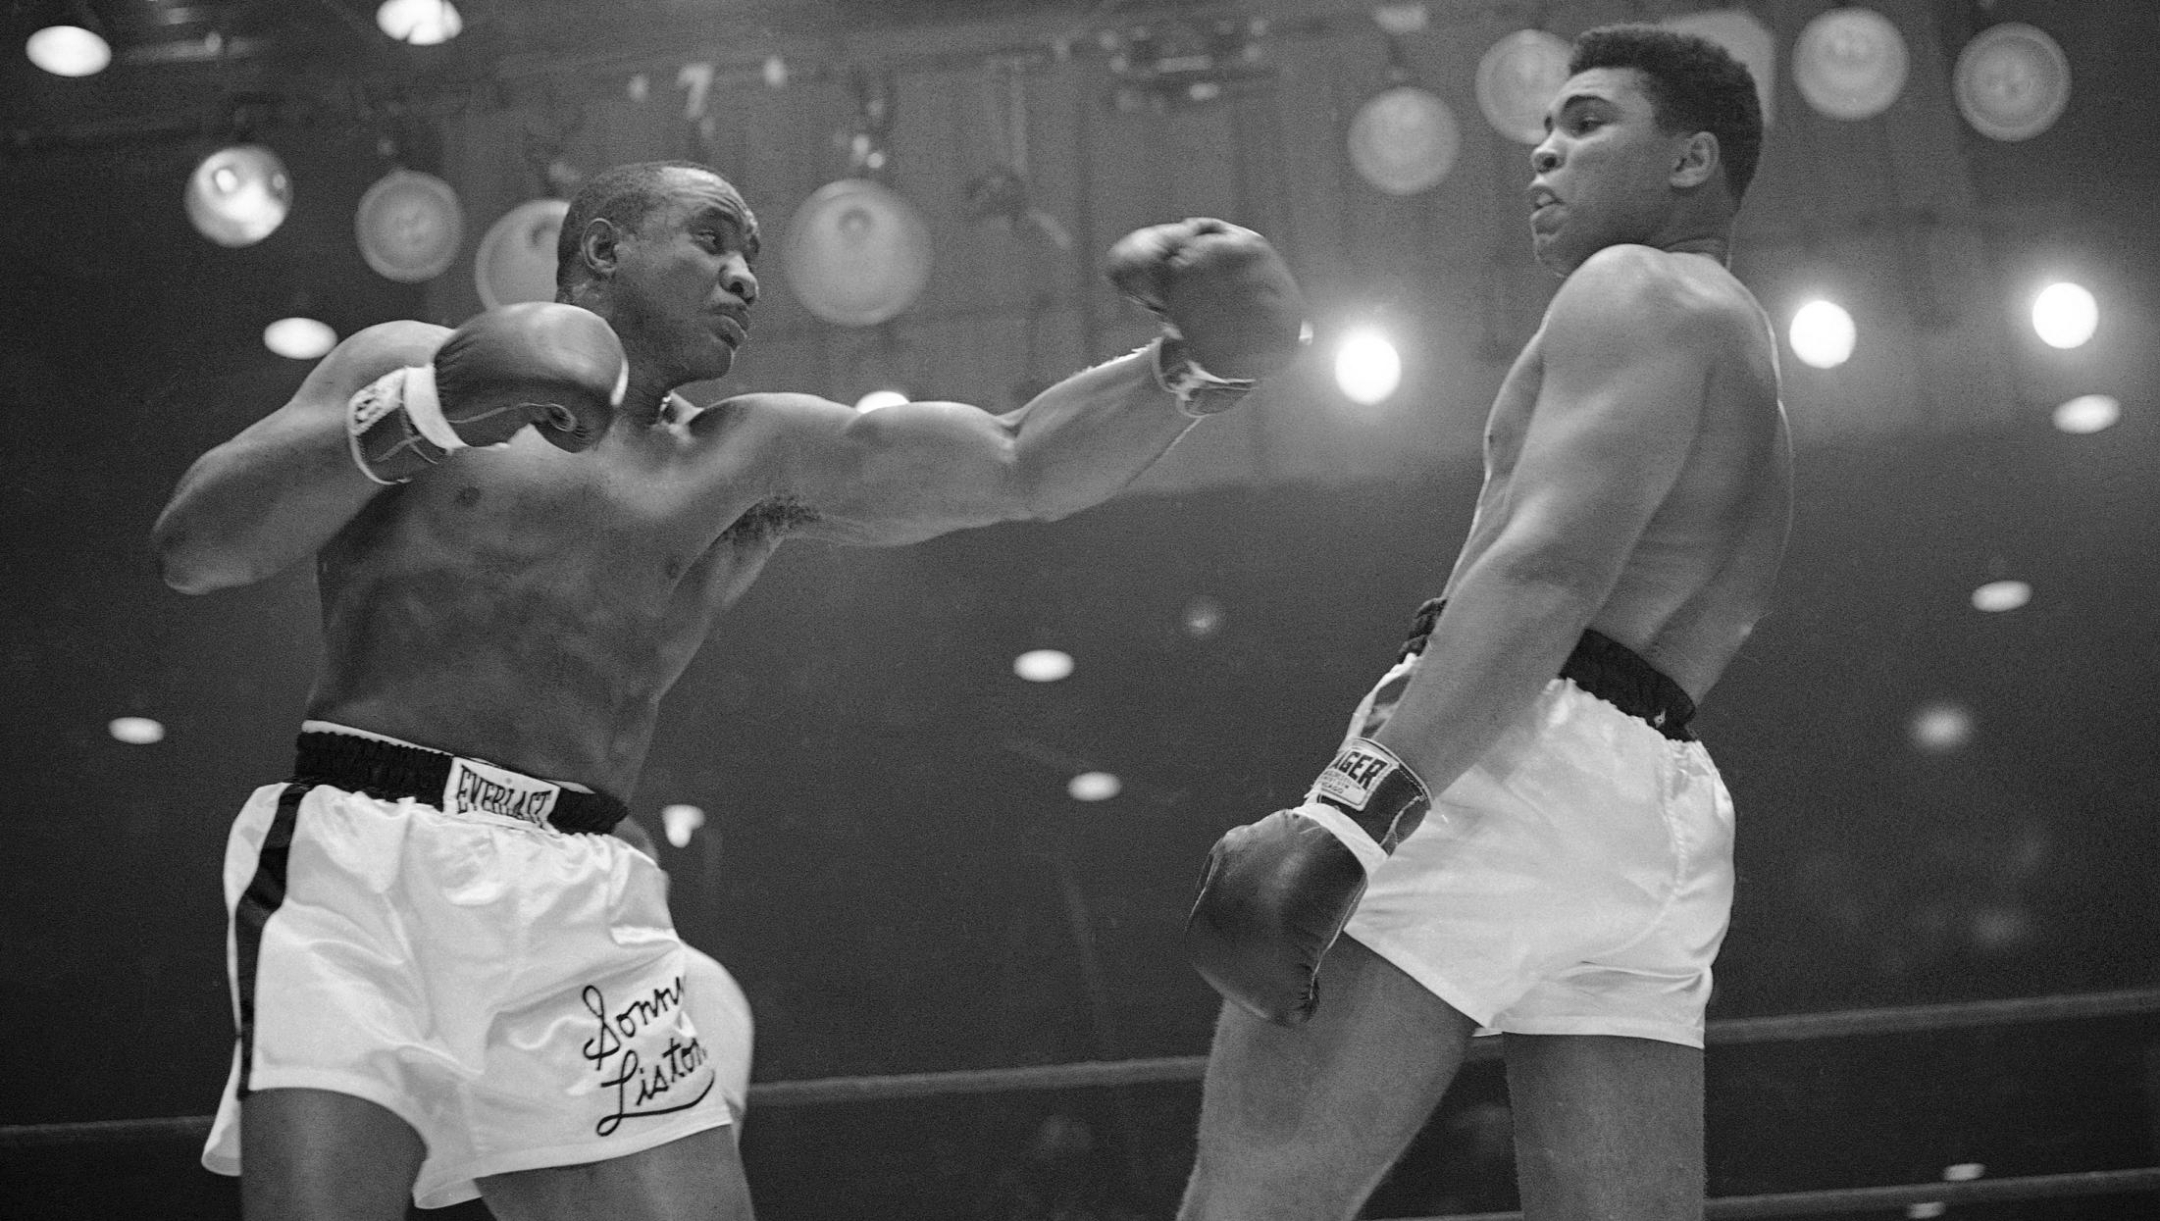 FILE - In this Feb. 26, 1964 file photo, Muhammad Ali (Cassius Clay)  uses a variety of bobbing and weaving to stay clear of the left arm of Sonny Liston in their title fight in Miami Beach, Fla.  Ali, the magnificent heavyweight champion whose fast fists and irrepressible personality transcended sports and captivated the world, has died according to a statement released by his family Friday, June 3, 2016. He was 74. (AP Photo)